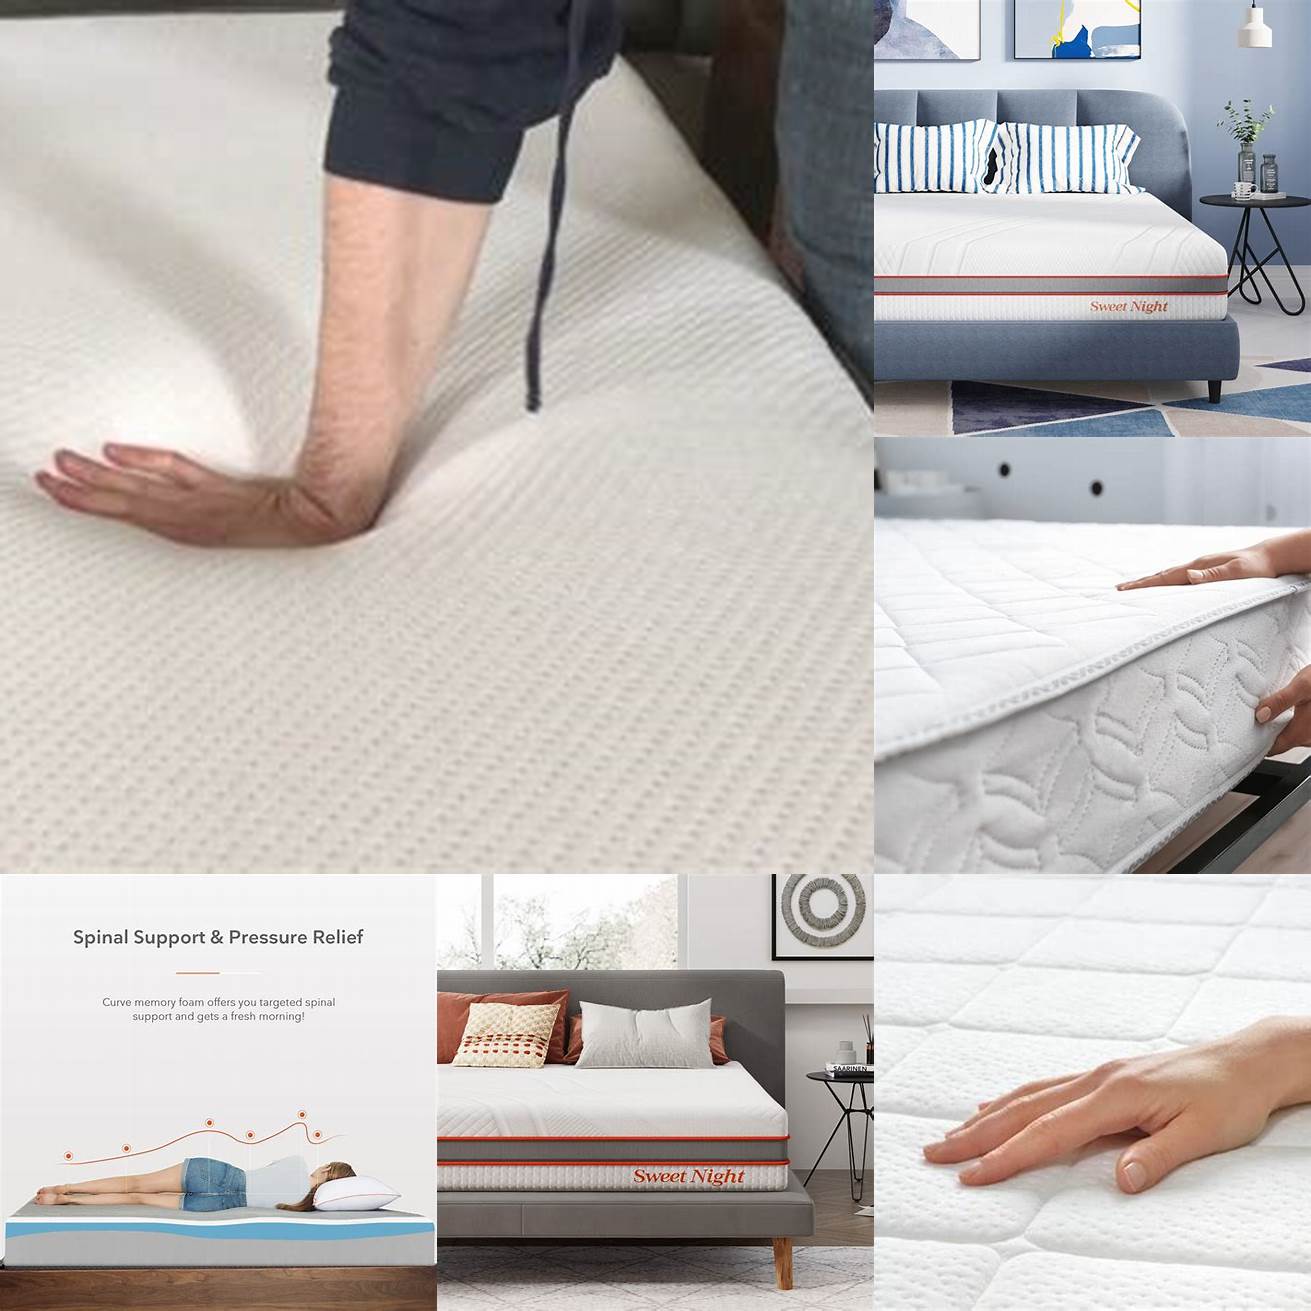 Consider your firmness preferences and sleeping position when choosing a memory foam bed